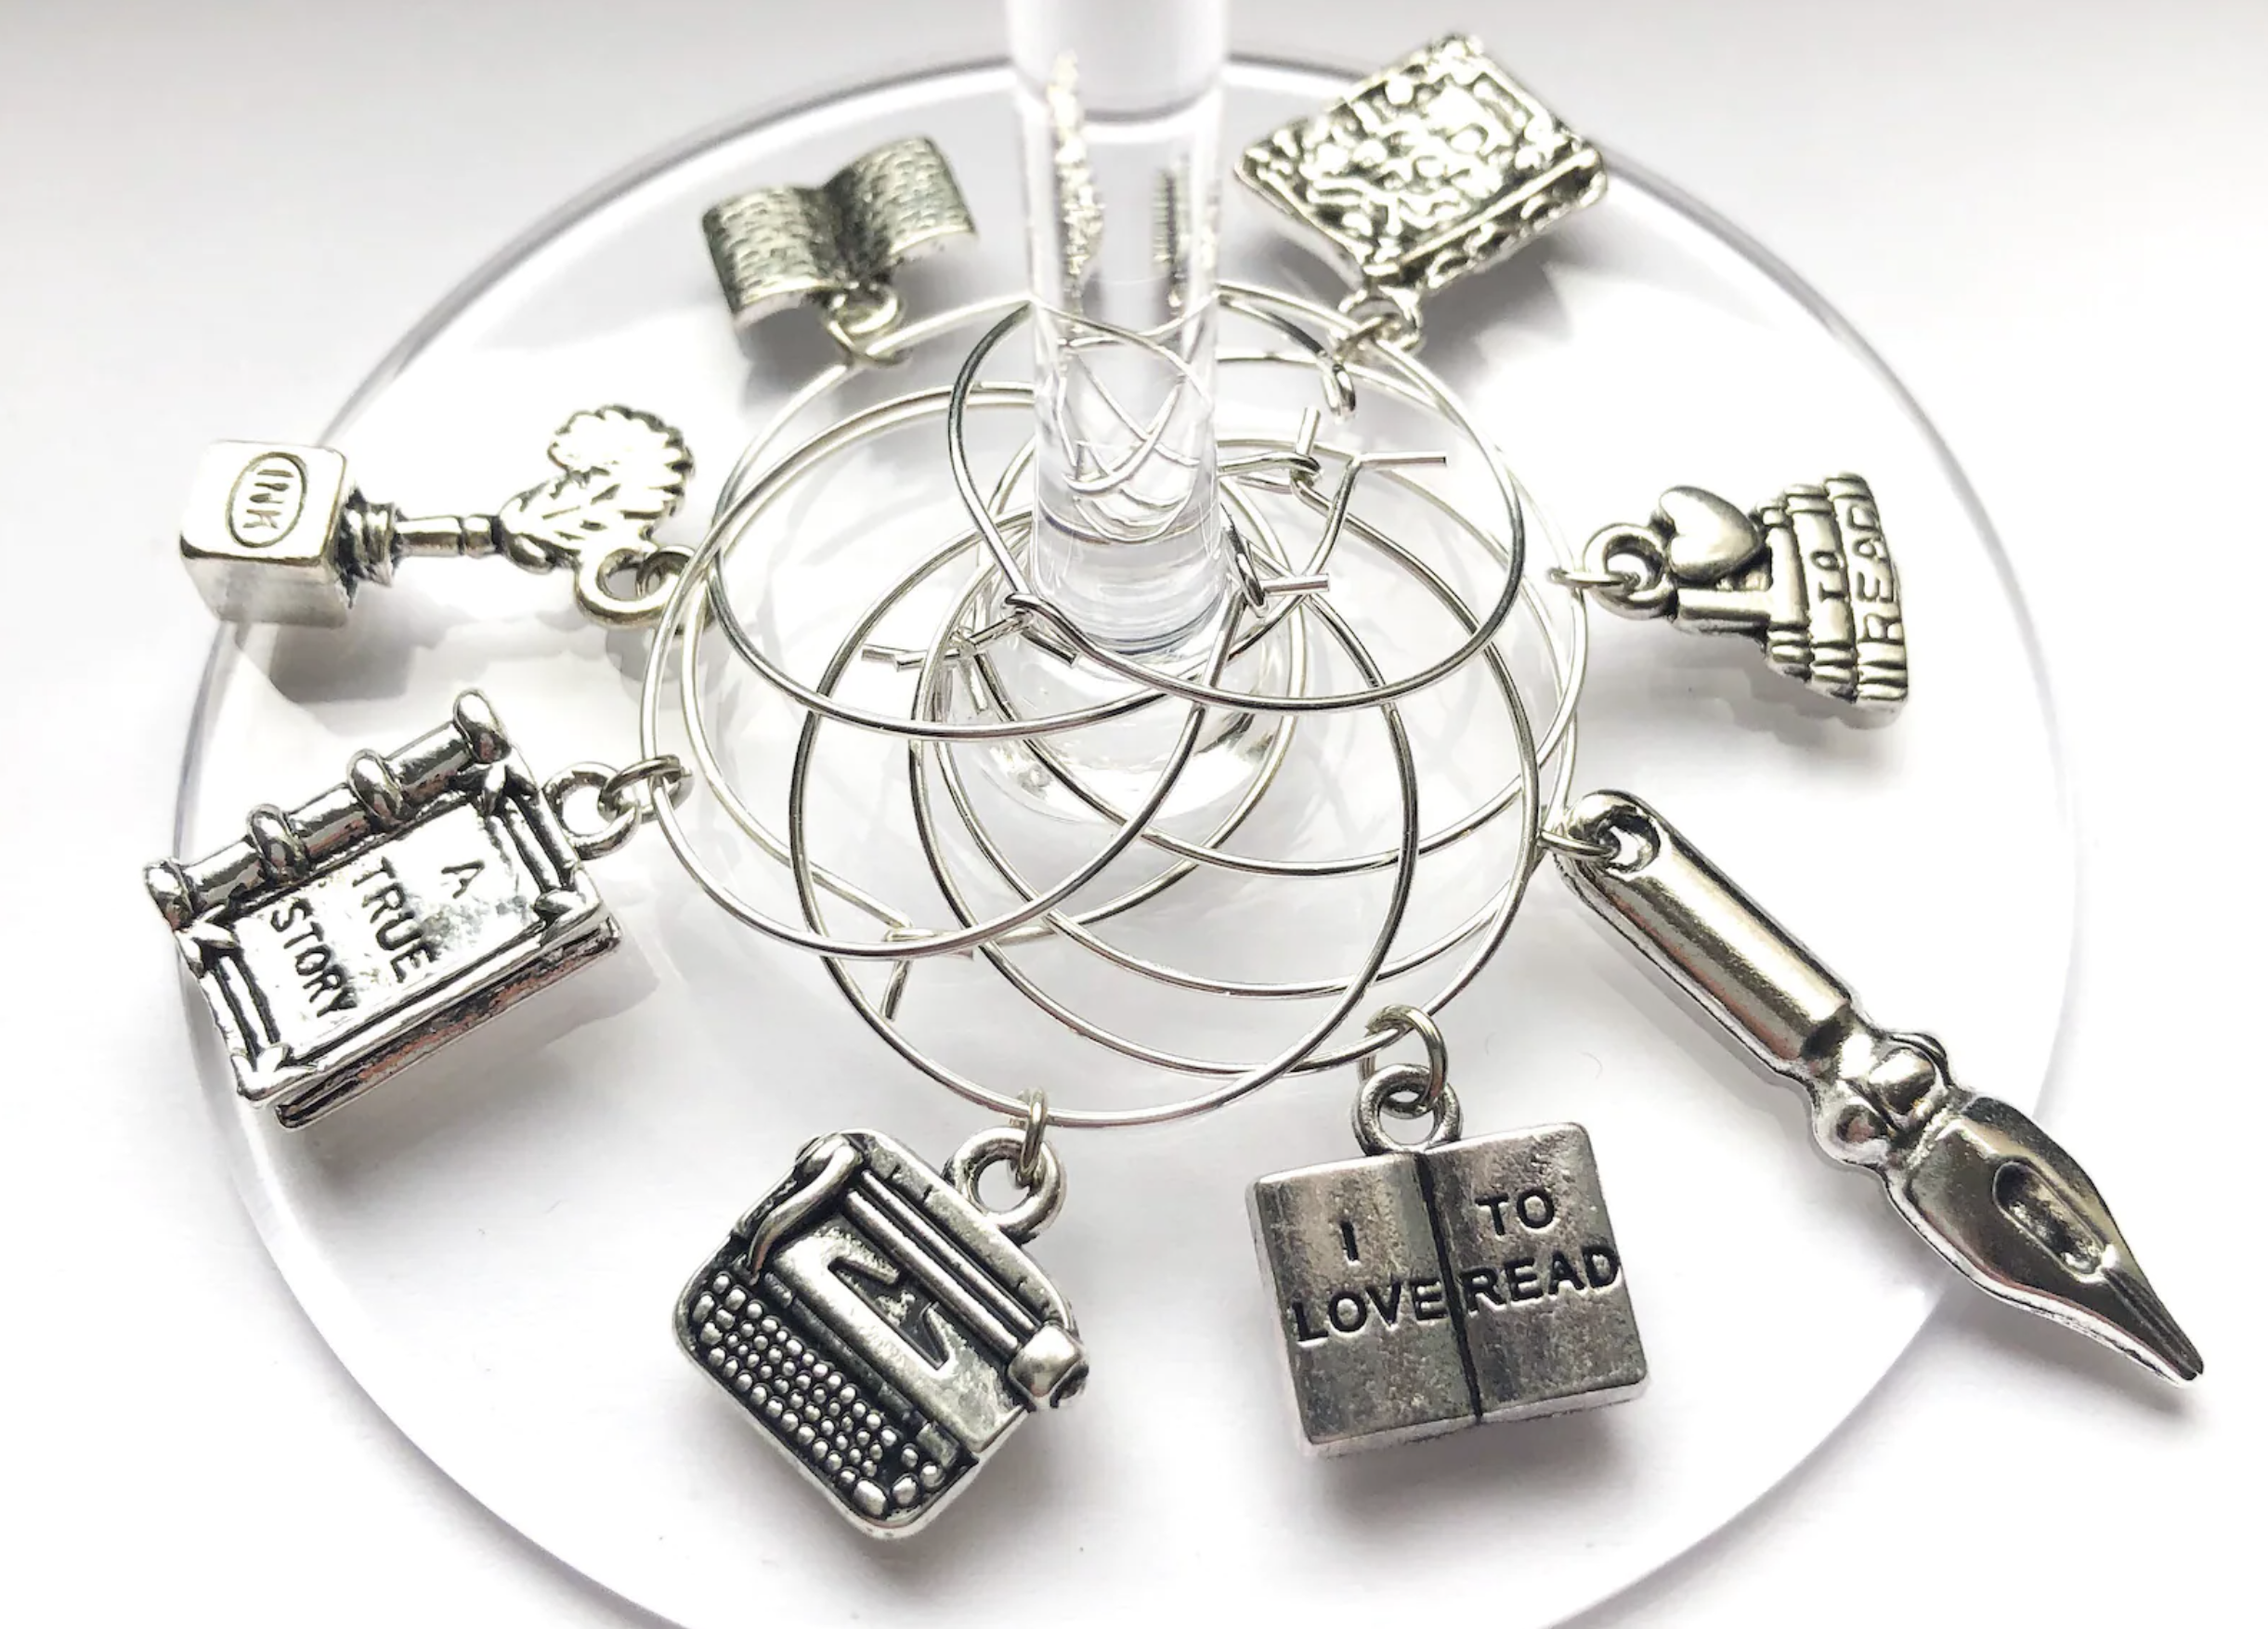 Eight wine glass charms are looped around the stem of a clear wine glass. The charms are silver and in the shapes of books, pen nibs, a typewriter, and a beanie hat. 